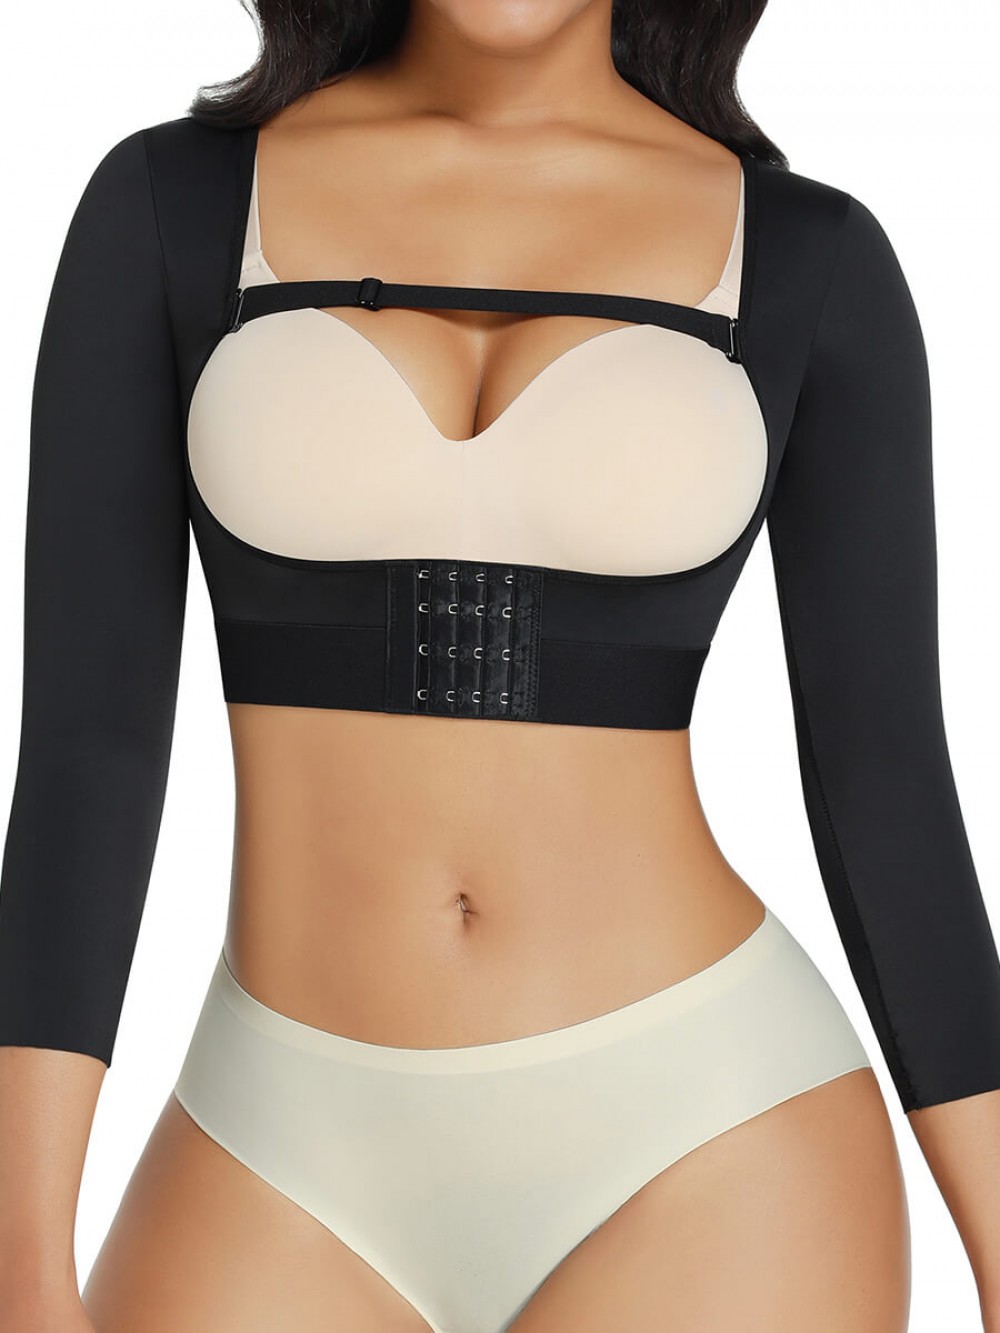 Black Body Corset U-Shaped Breast Support Stretchy Posture Corrector